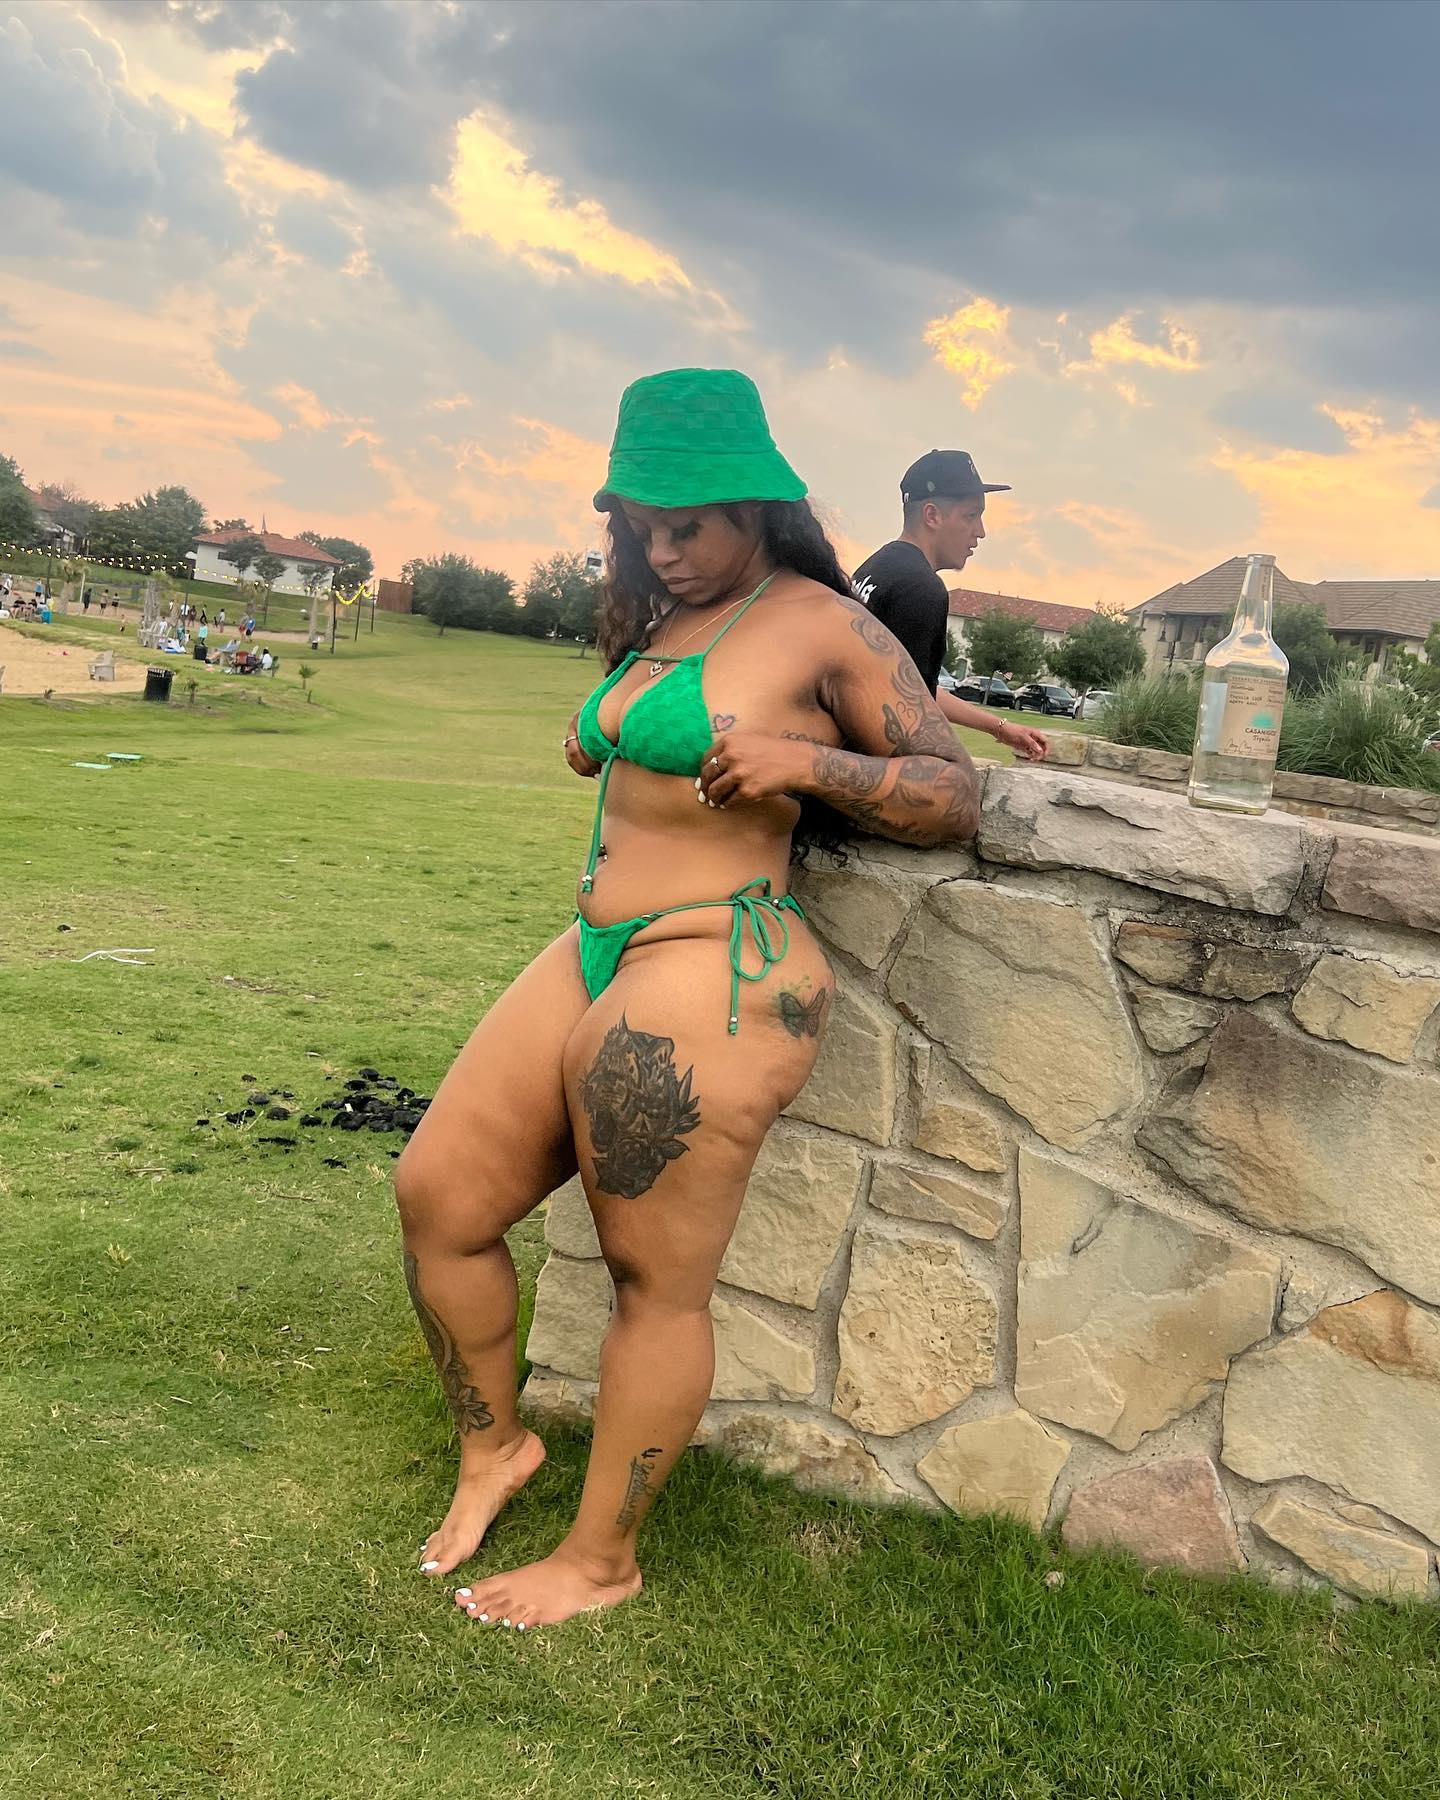 Hard to forget but here’s a reminder 💚🐐 

Swimsuit👙 @xtherealkdoll